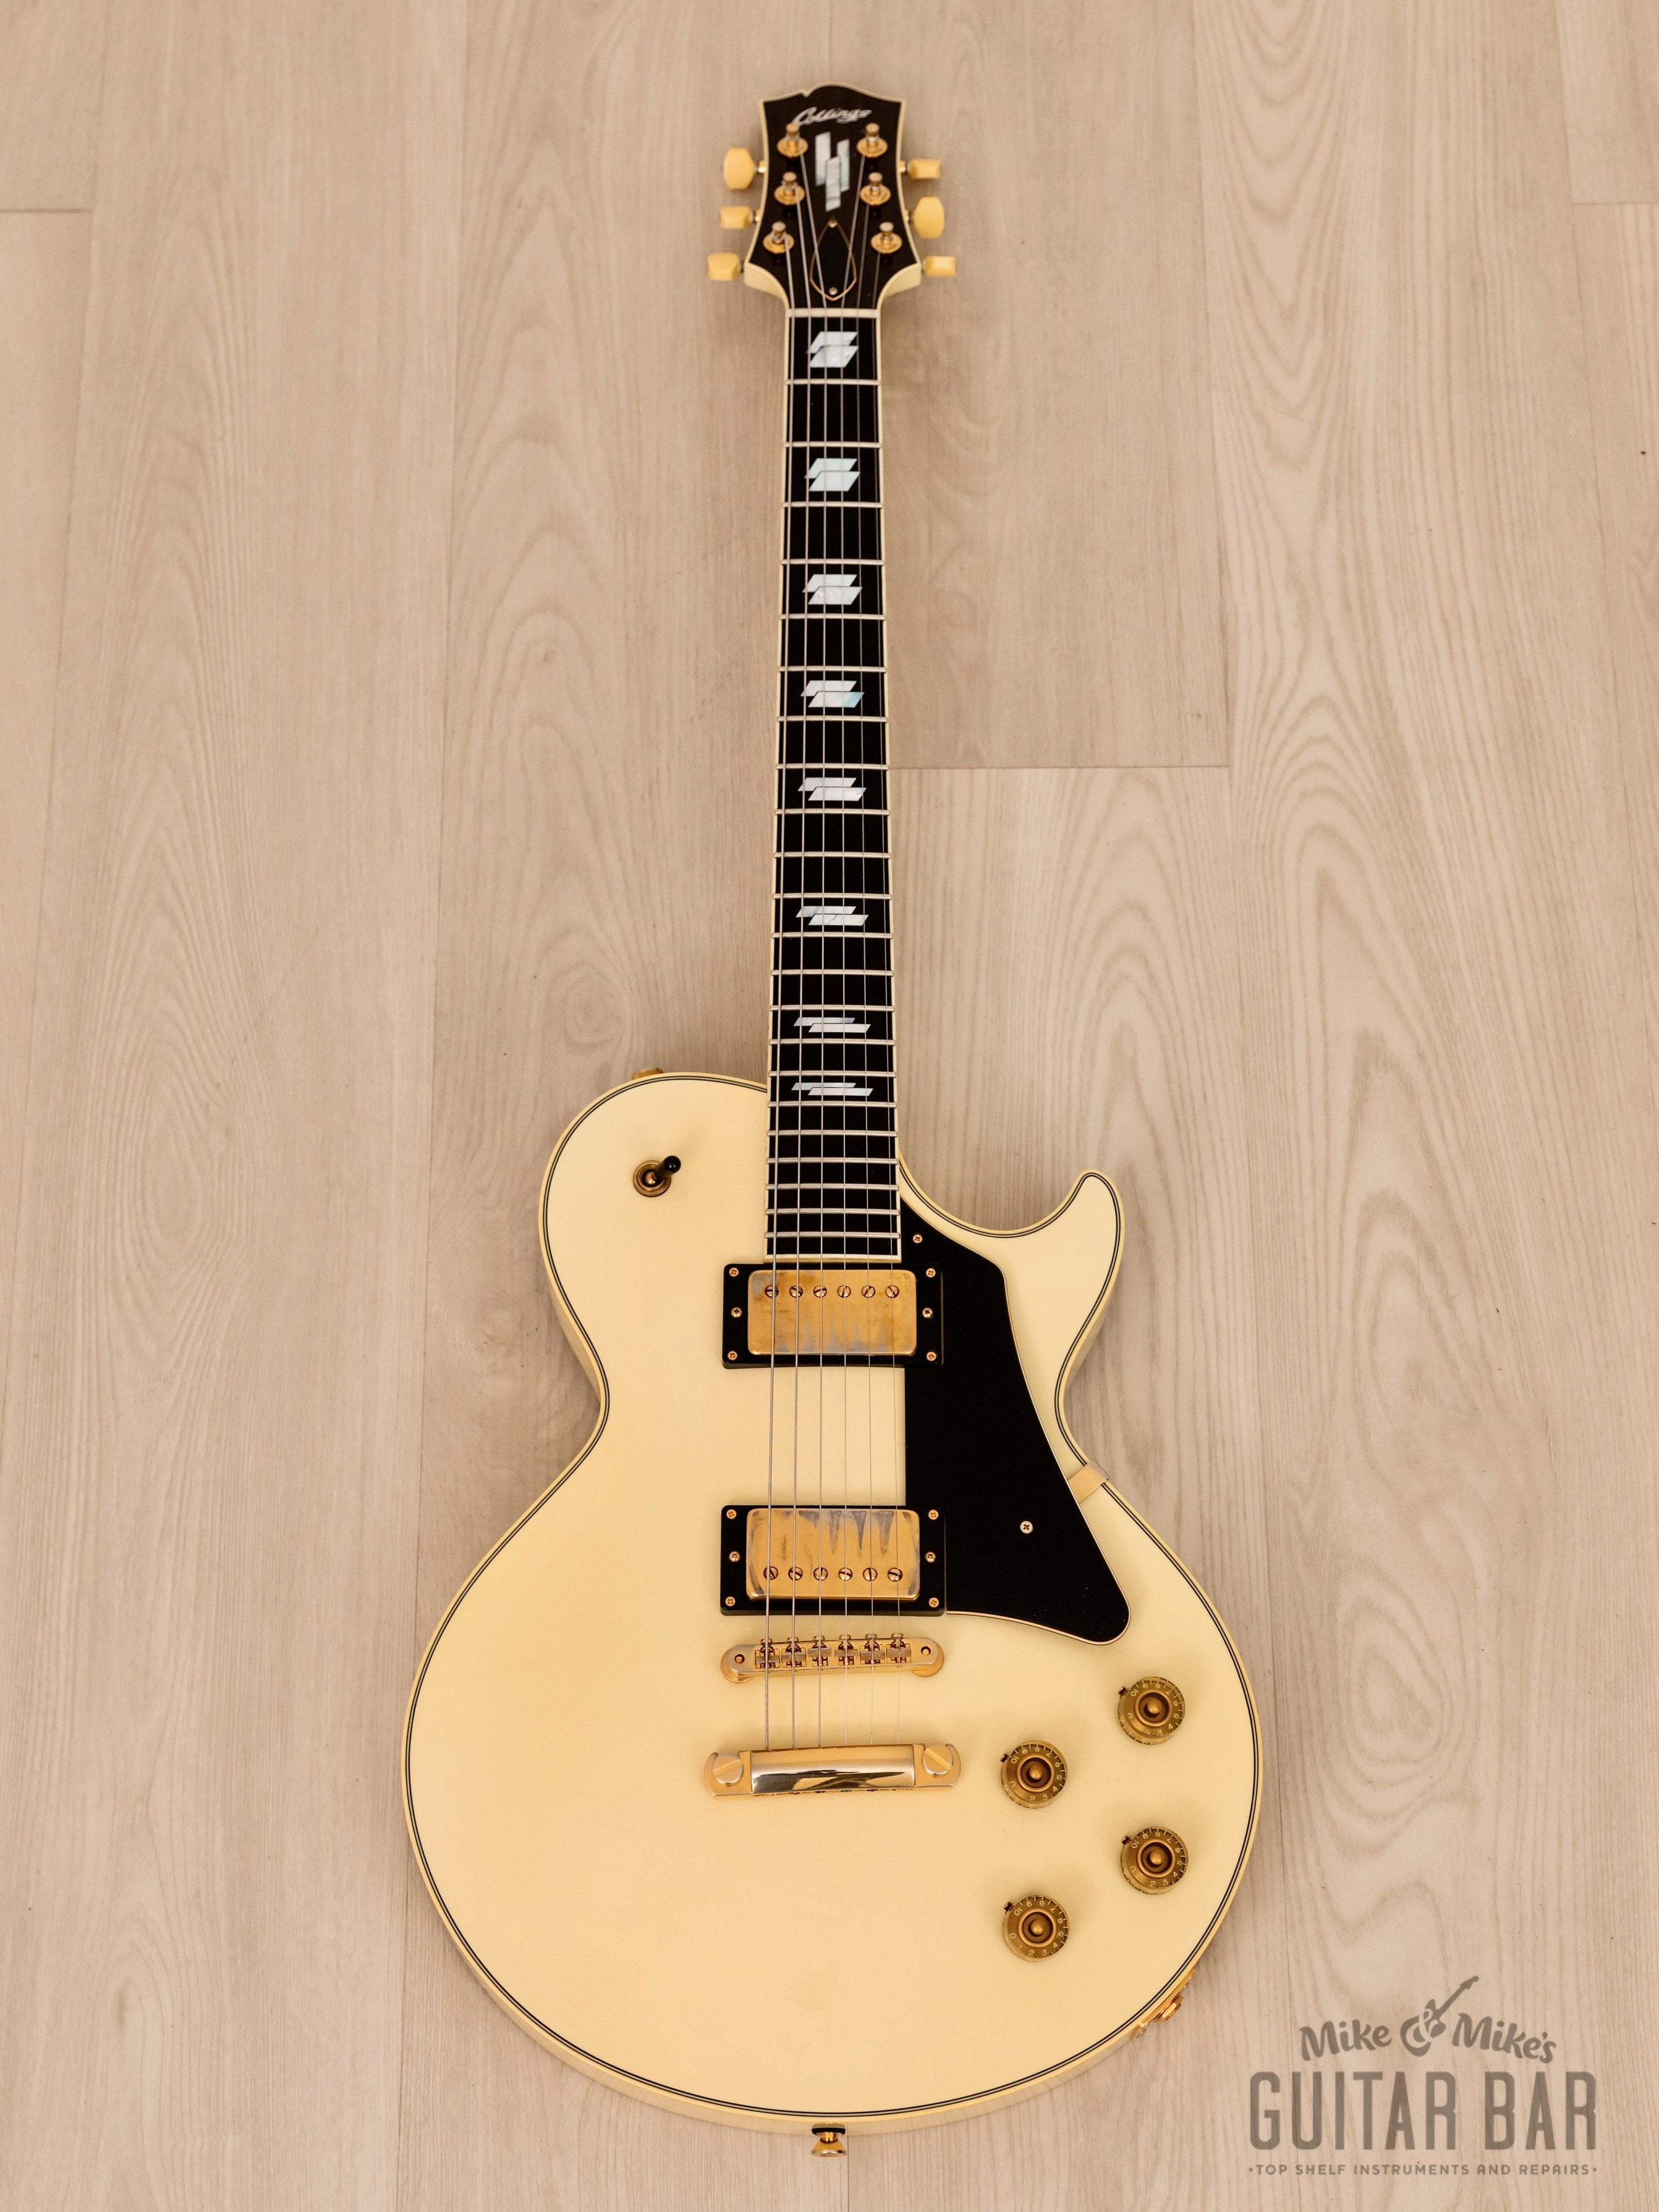 2021 Collings City Limits Deluxe Aged Olympic White Near-Mint w/ Mahogany Top, Bare Knuckle Black Dog, Case & Tags